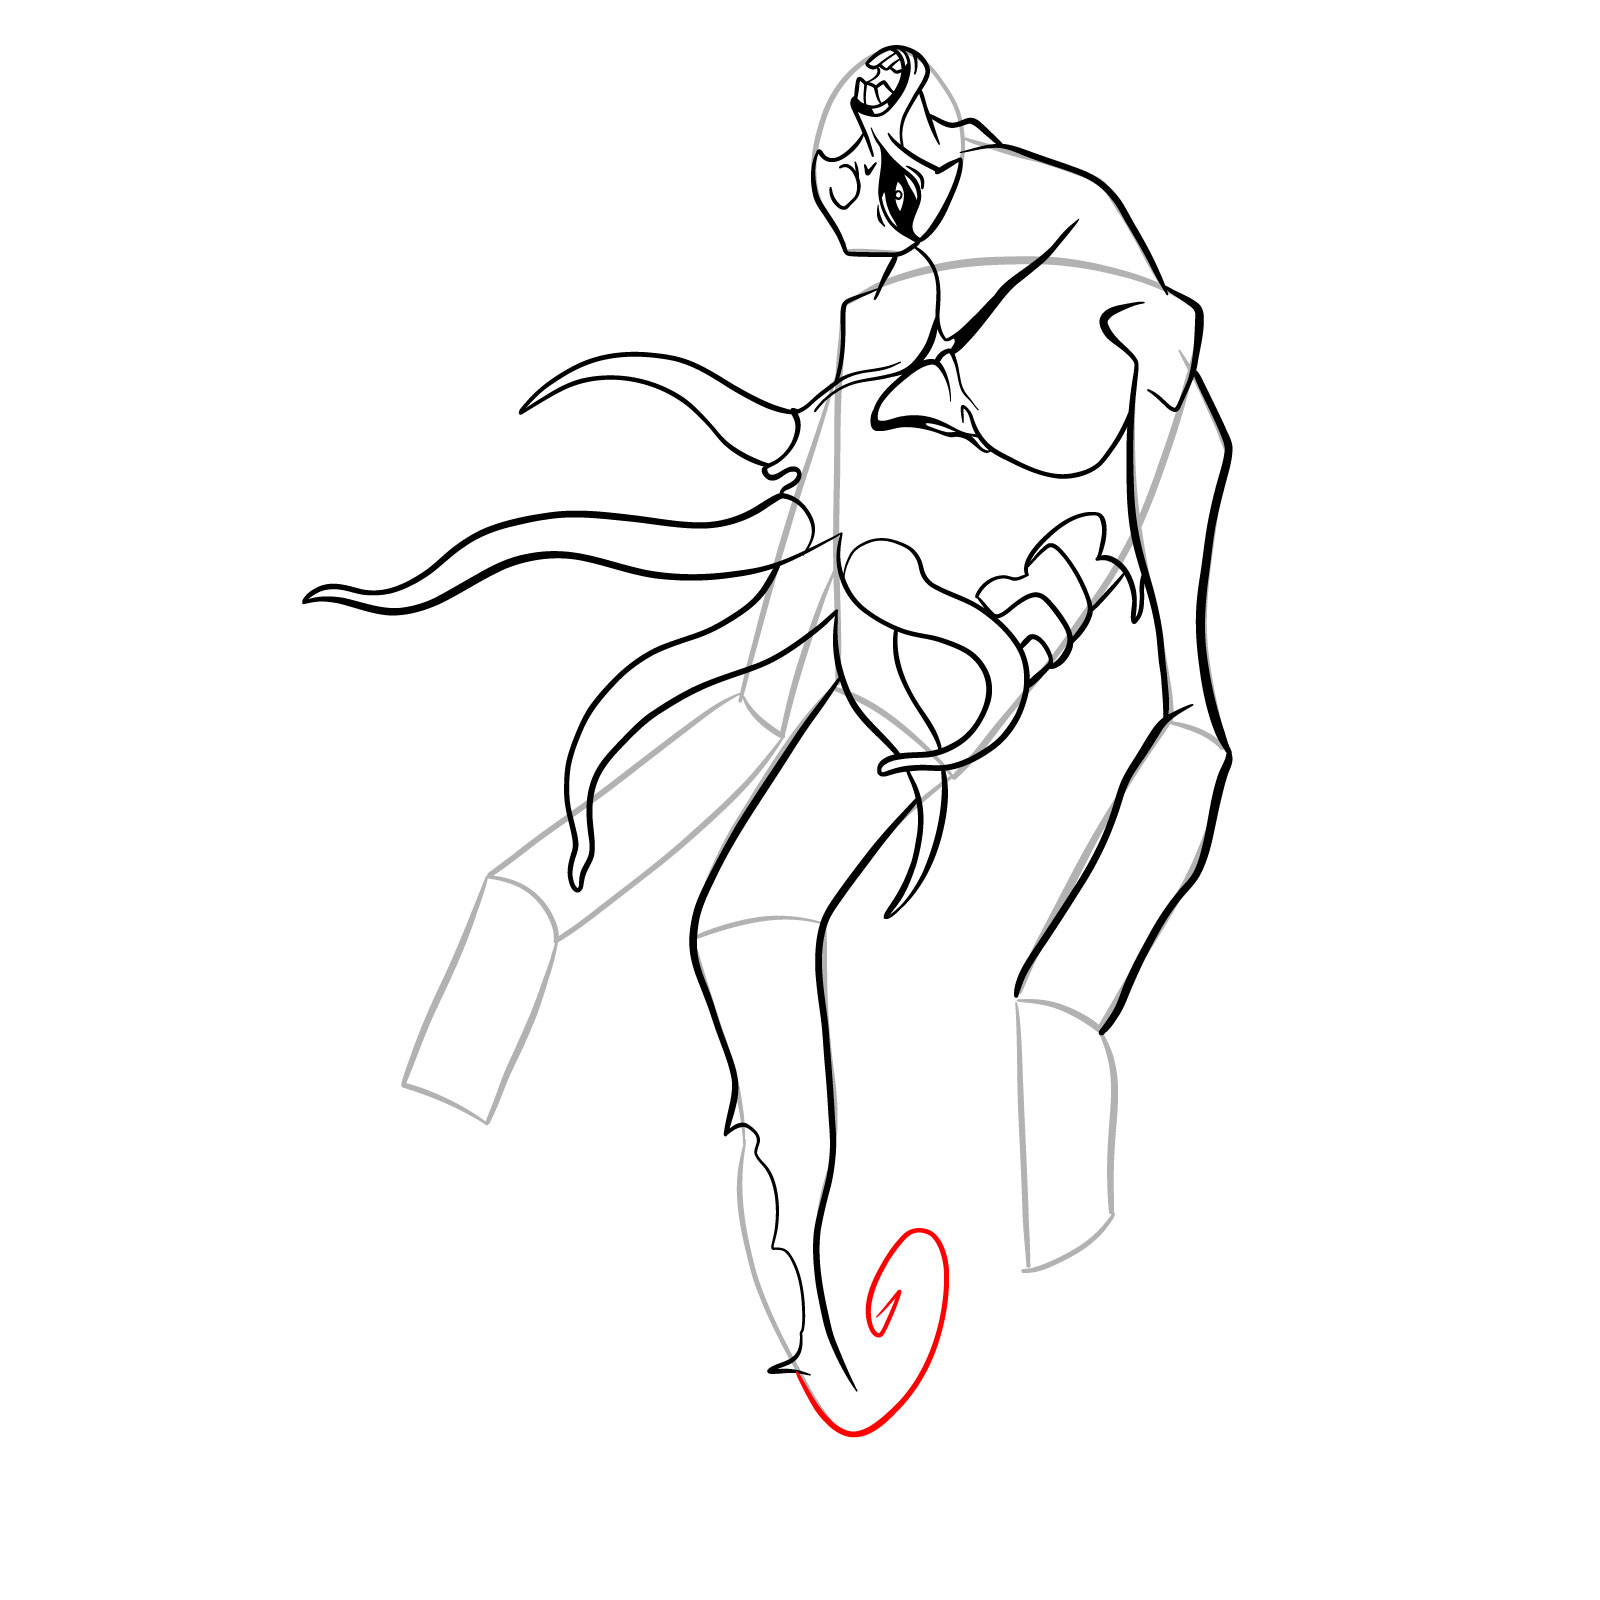 How to draw Zs'Skayr (OS) - step 24